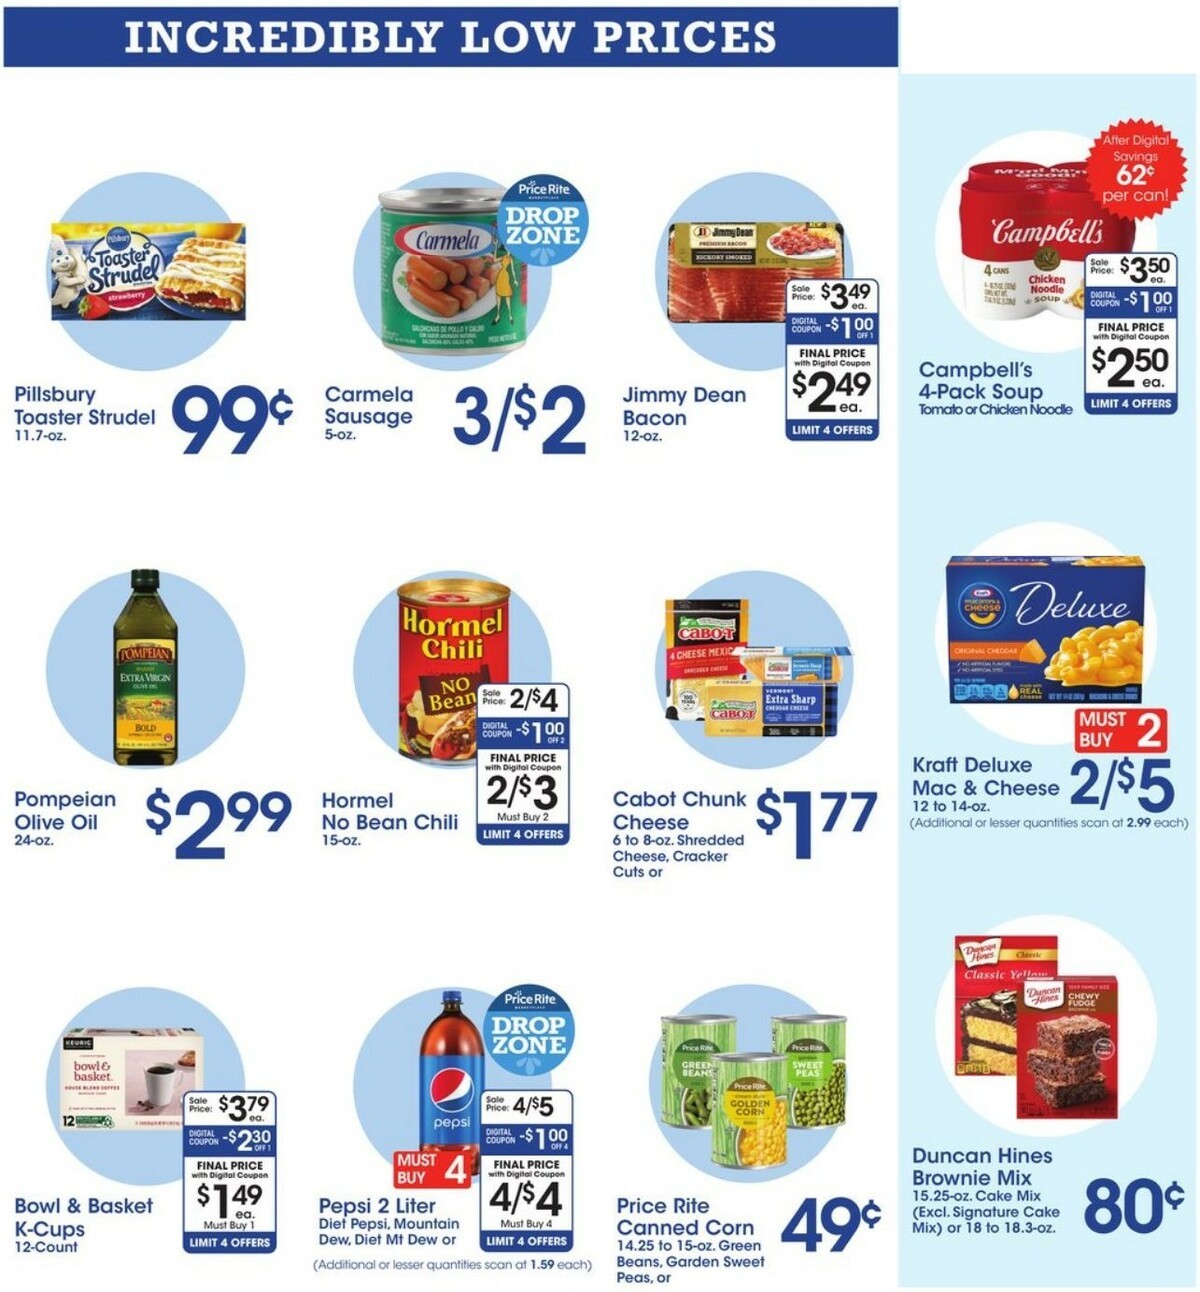 Price Rite Weekly Ad from October 29